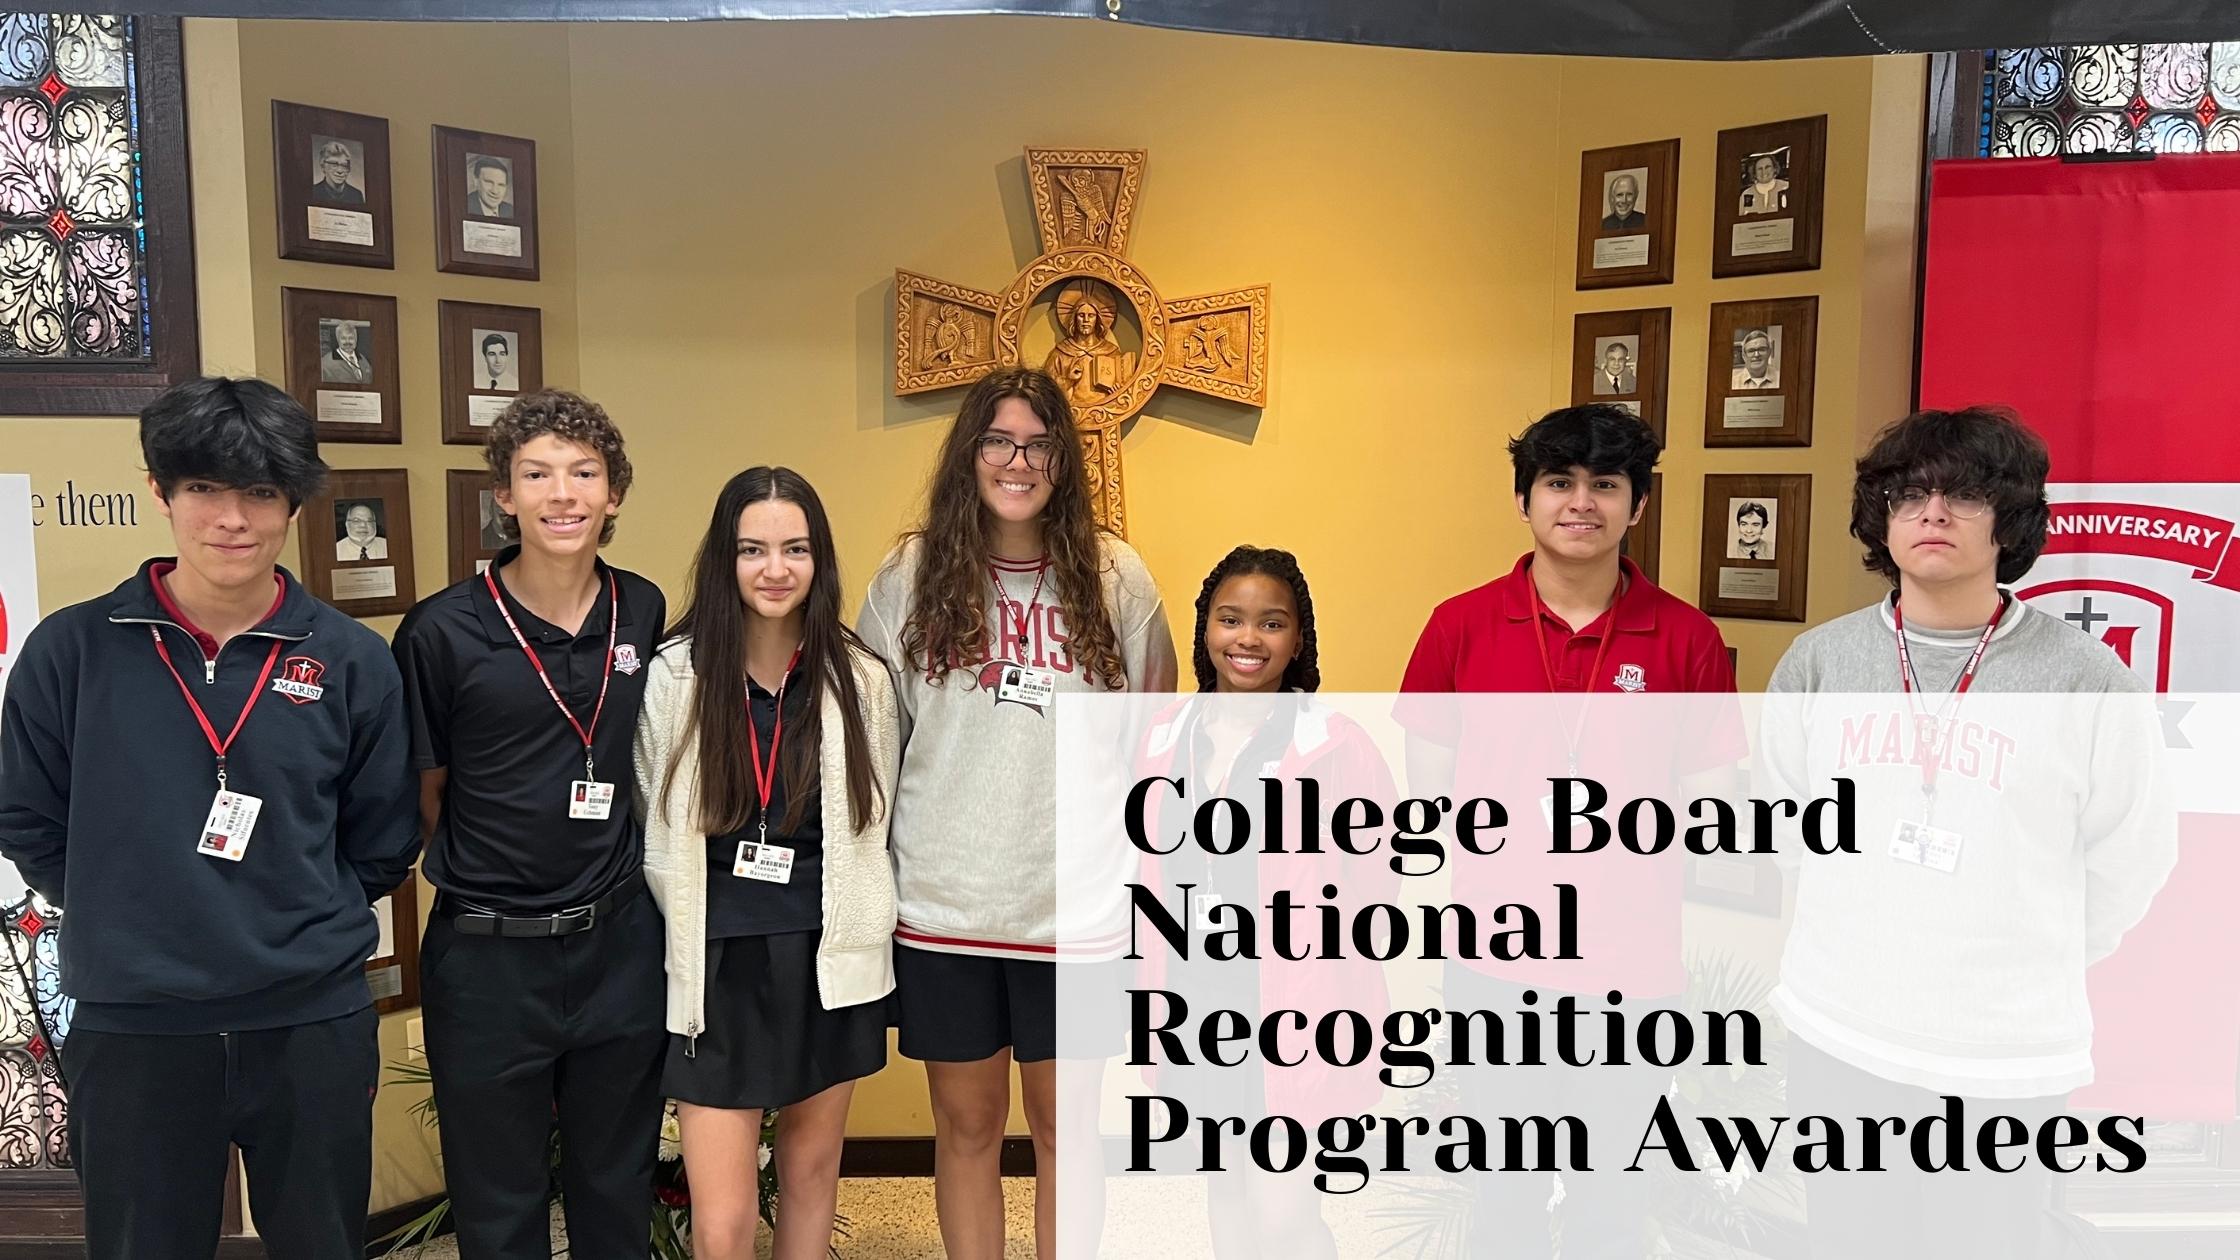 Students Awarded to the College Board National Recognition Program